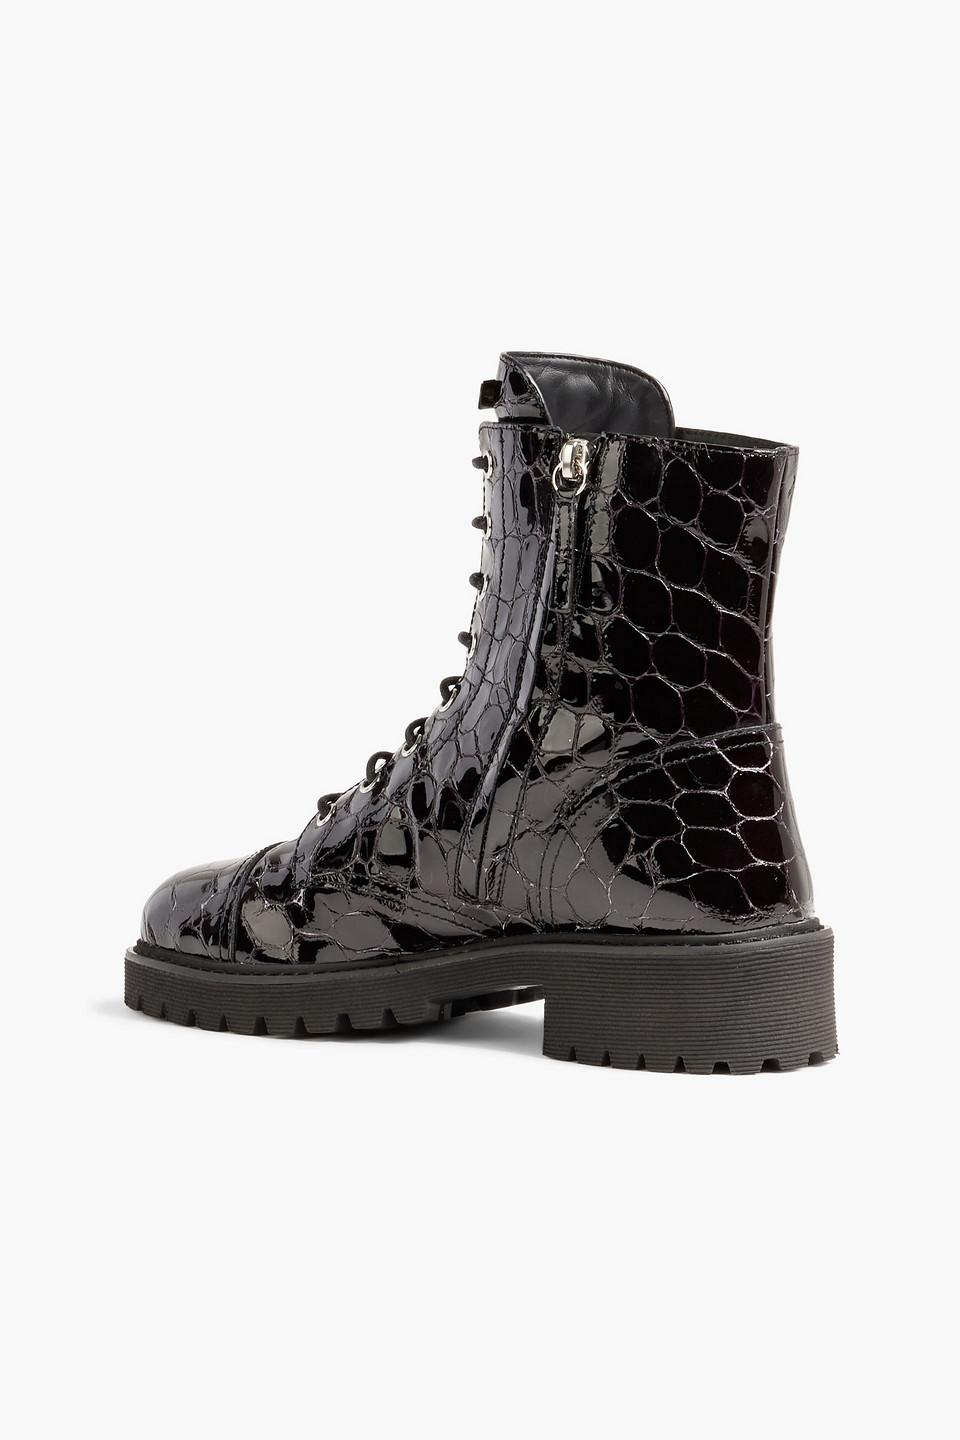 Giuseppe Zanotti Thora Croc-effect Patent-leather Combat Boots in Black |  Lyst